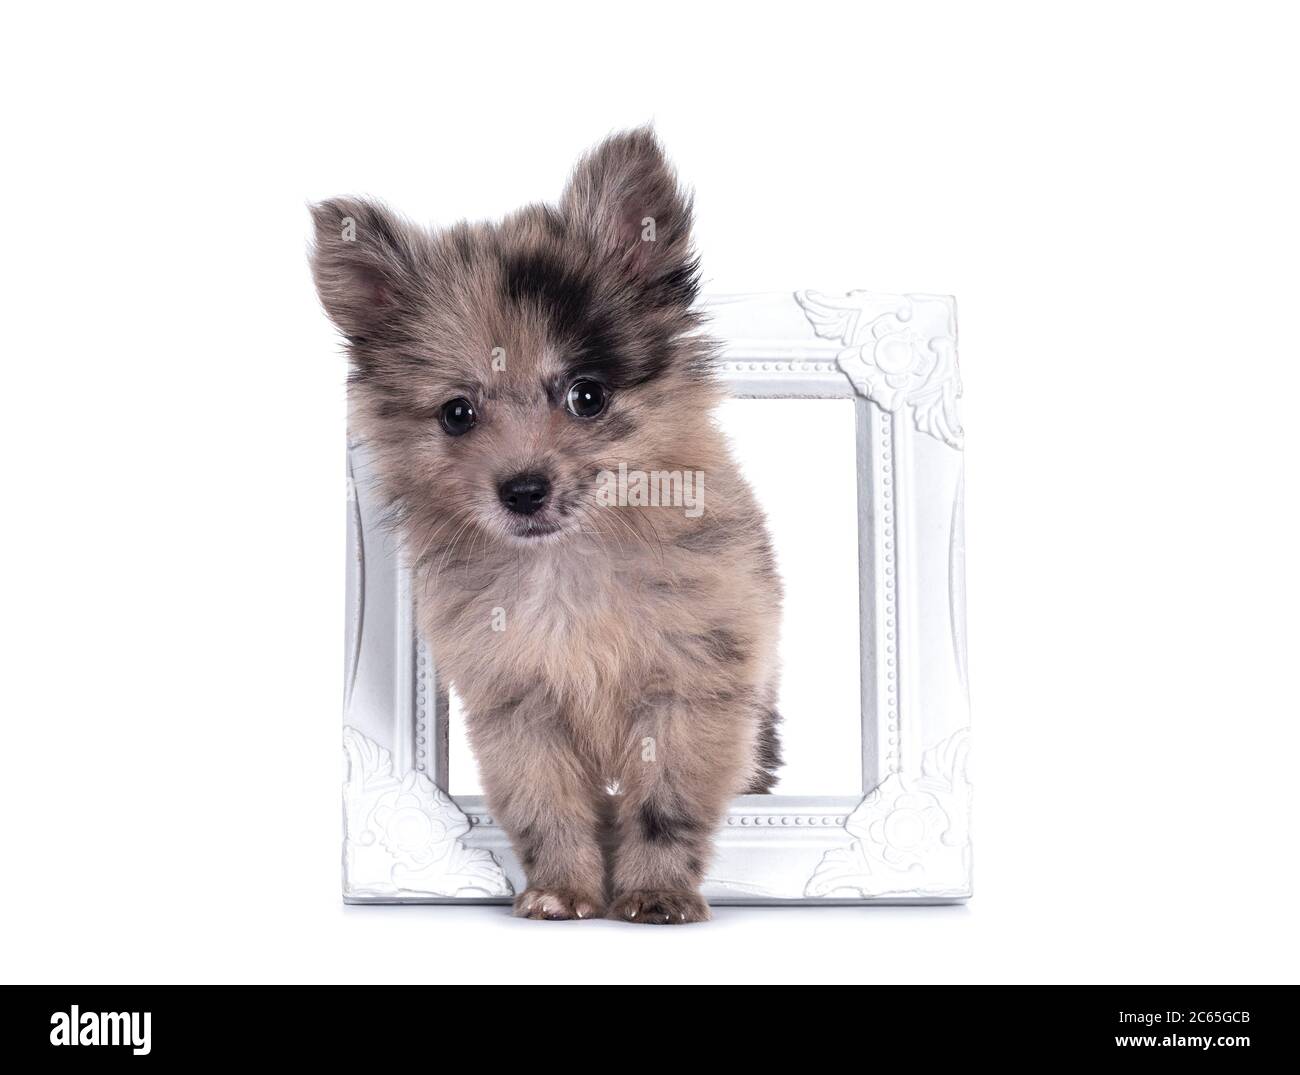 Very cute blue merle mixed breed Pomerian / Boomer puppy, standing through white photo frame. Looking towards camera with shiny dark eyes. Isolated on Stock Photo